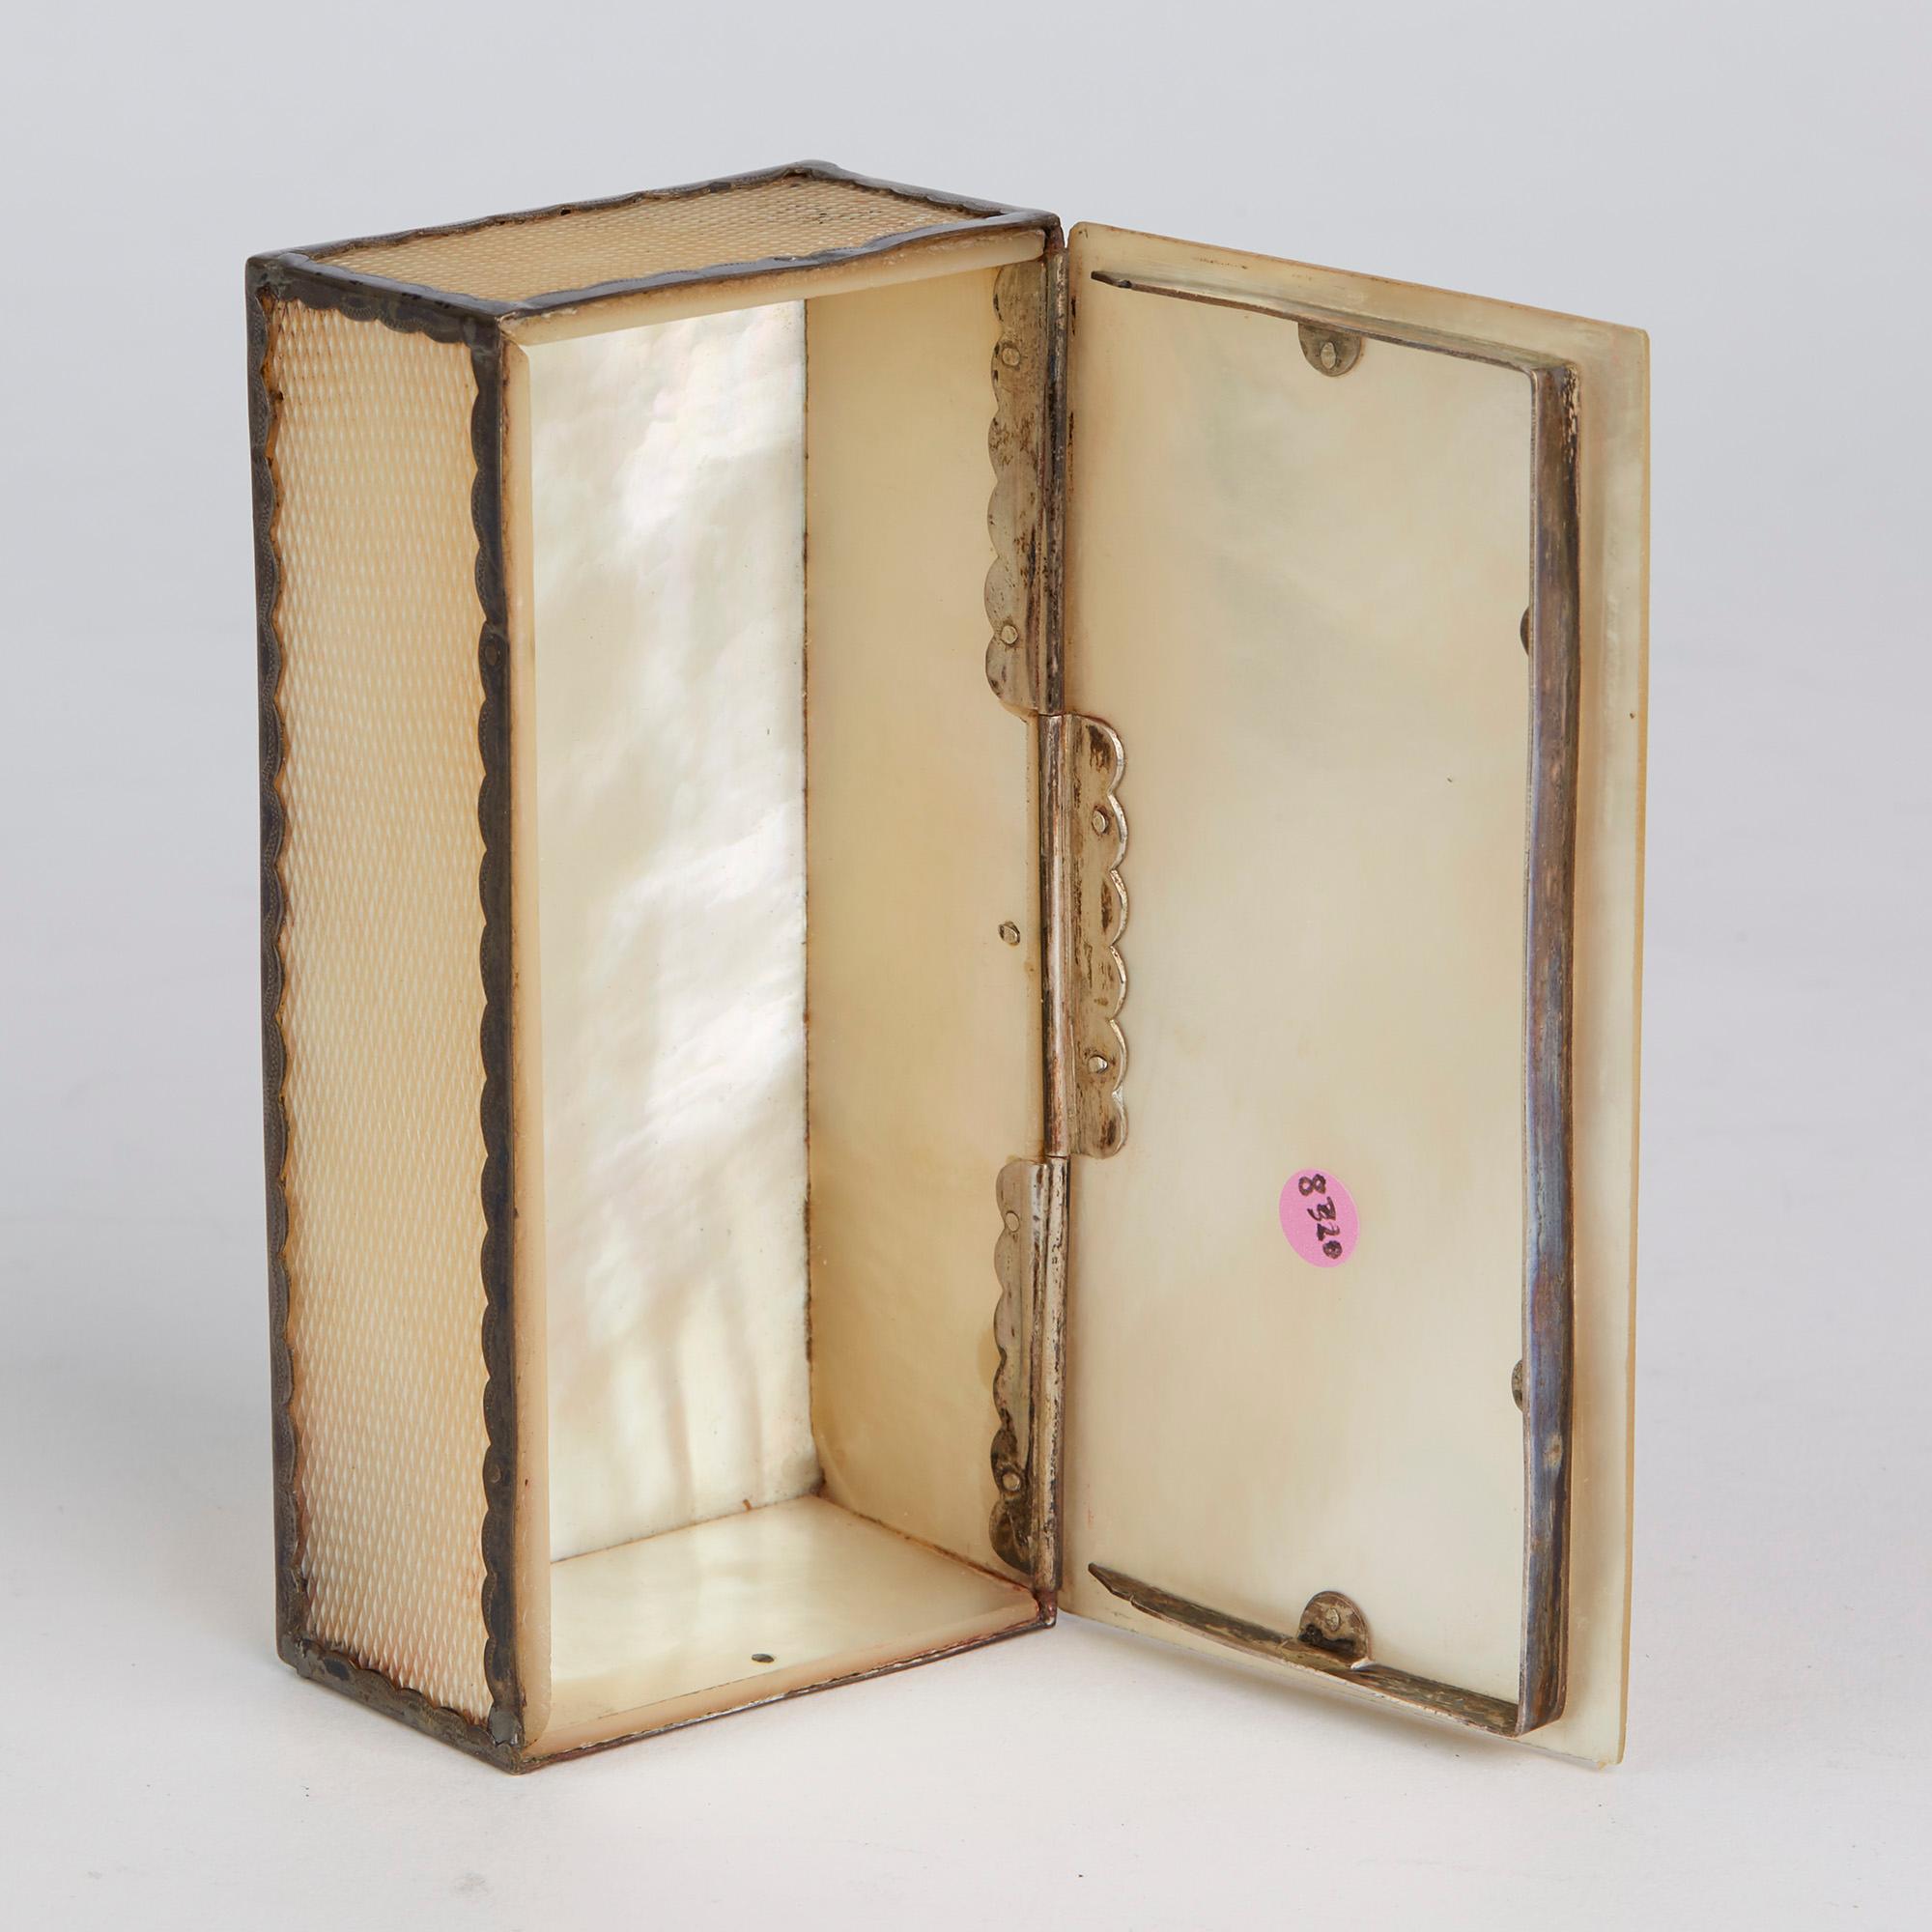 An exceptional and fine antique French silver mounted mother of pearl box and with an exquisitely carved ducal with a maiden holding a coronet, elaborate monogram and a rod of Caduceus dating from circa 1800. The rectangular shaped box is